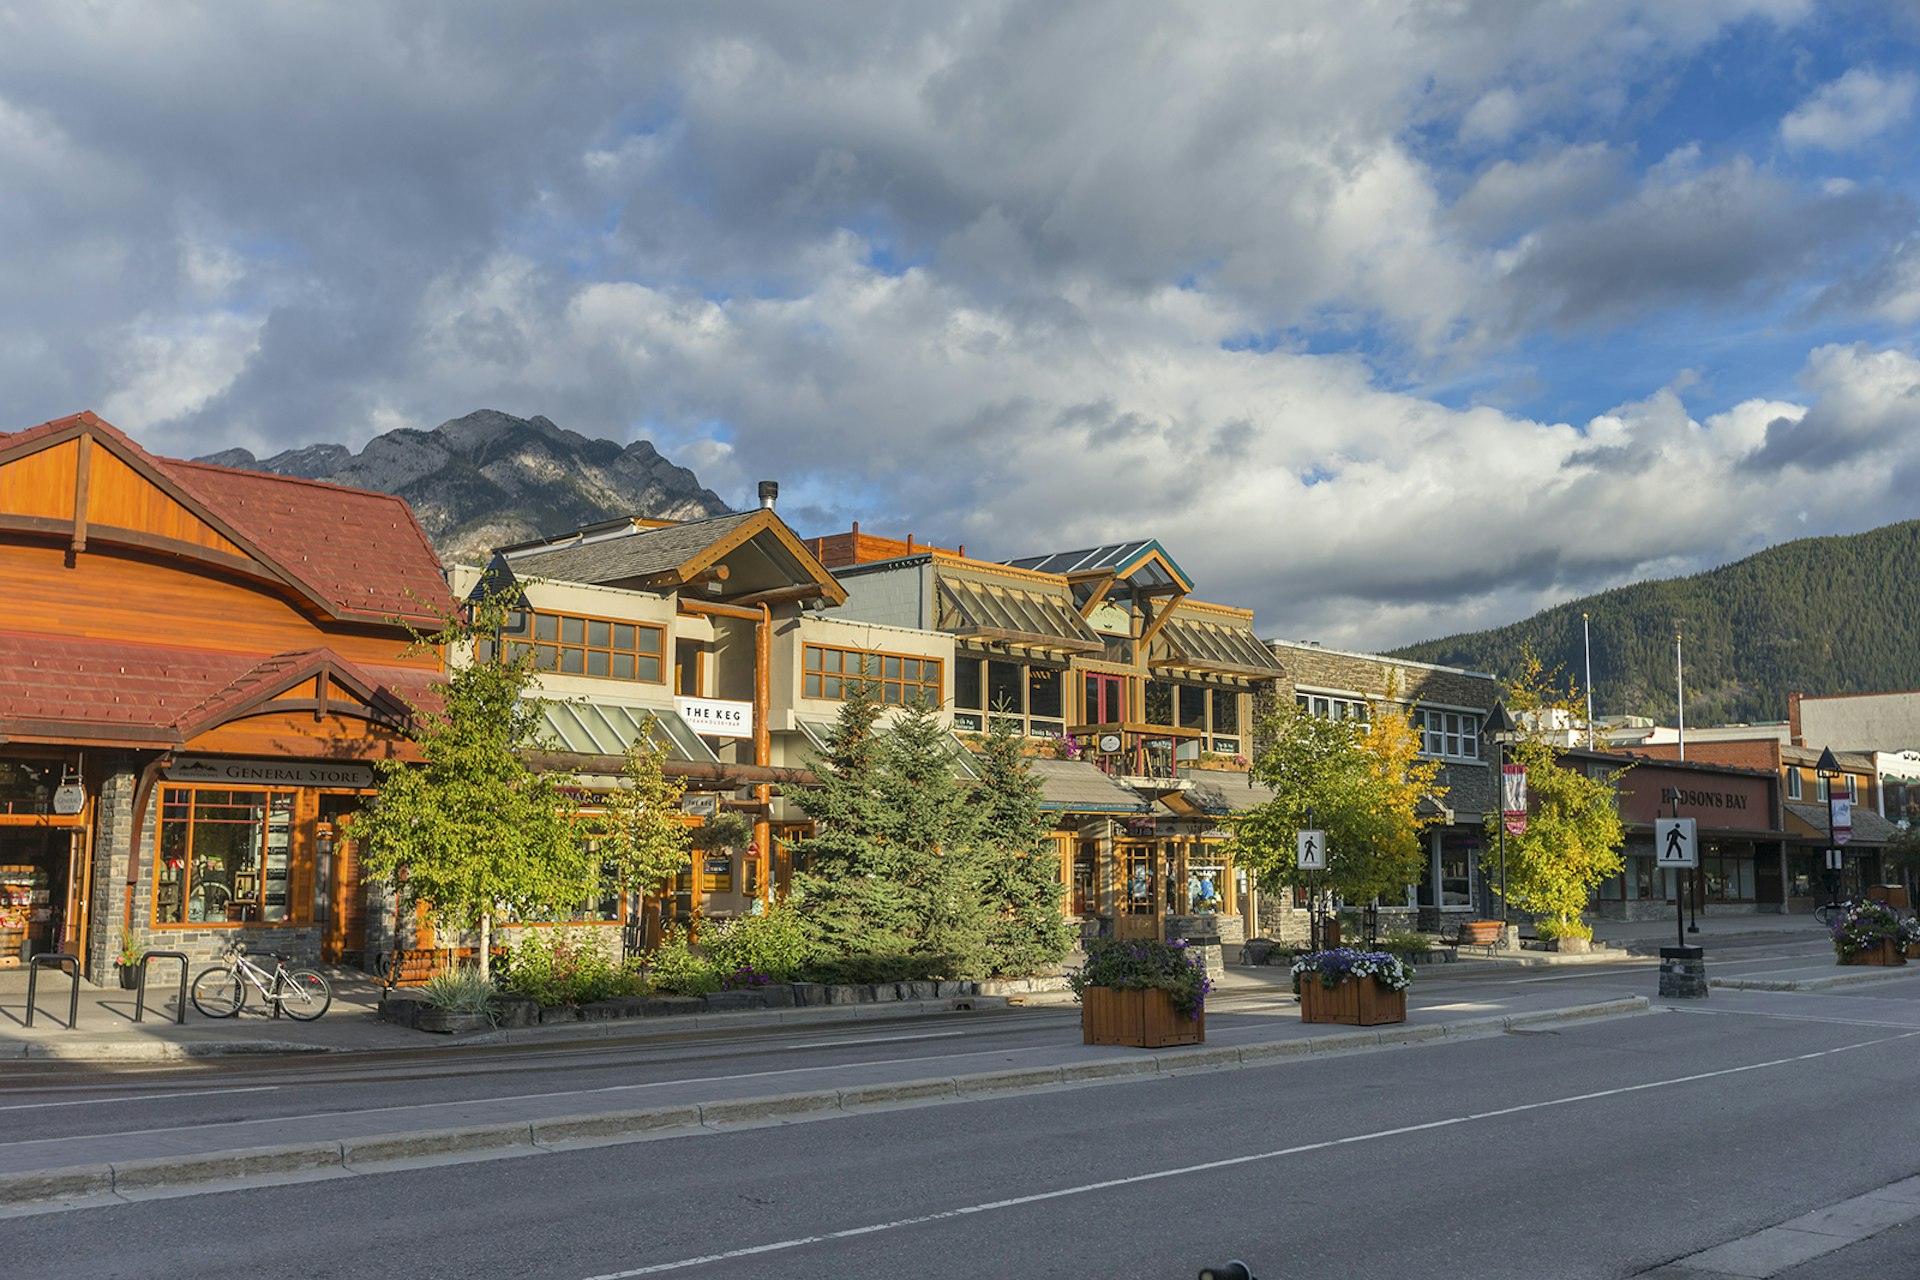 Features - Downtown Streets of Banff National Park Canada